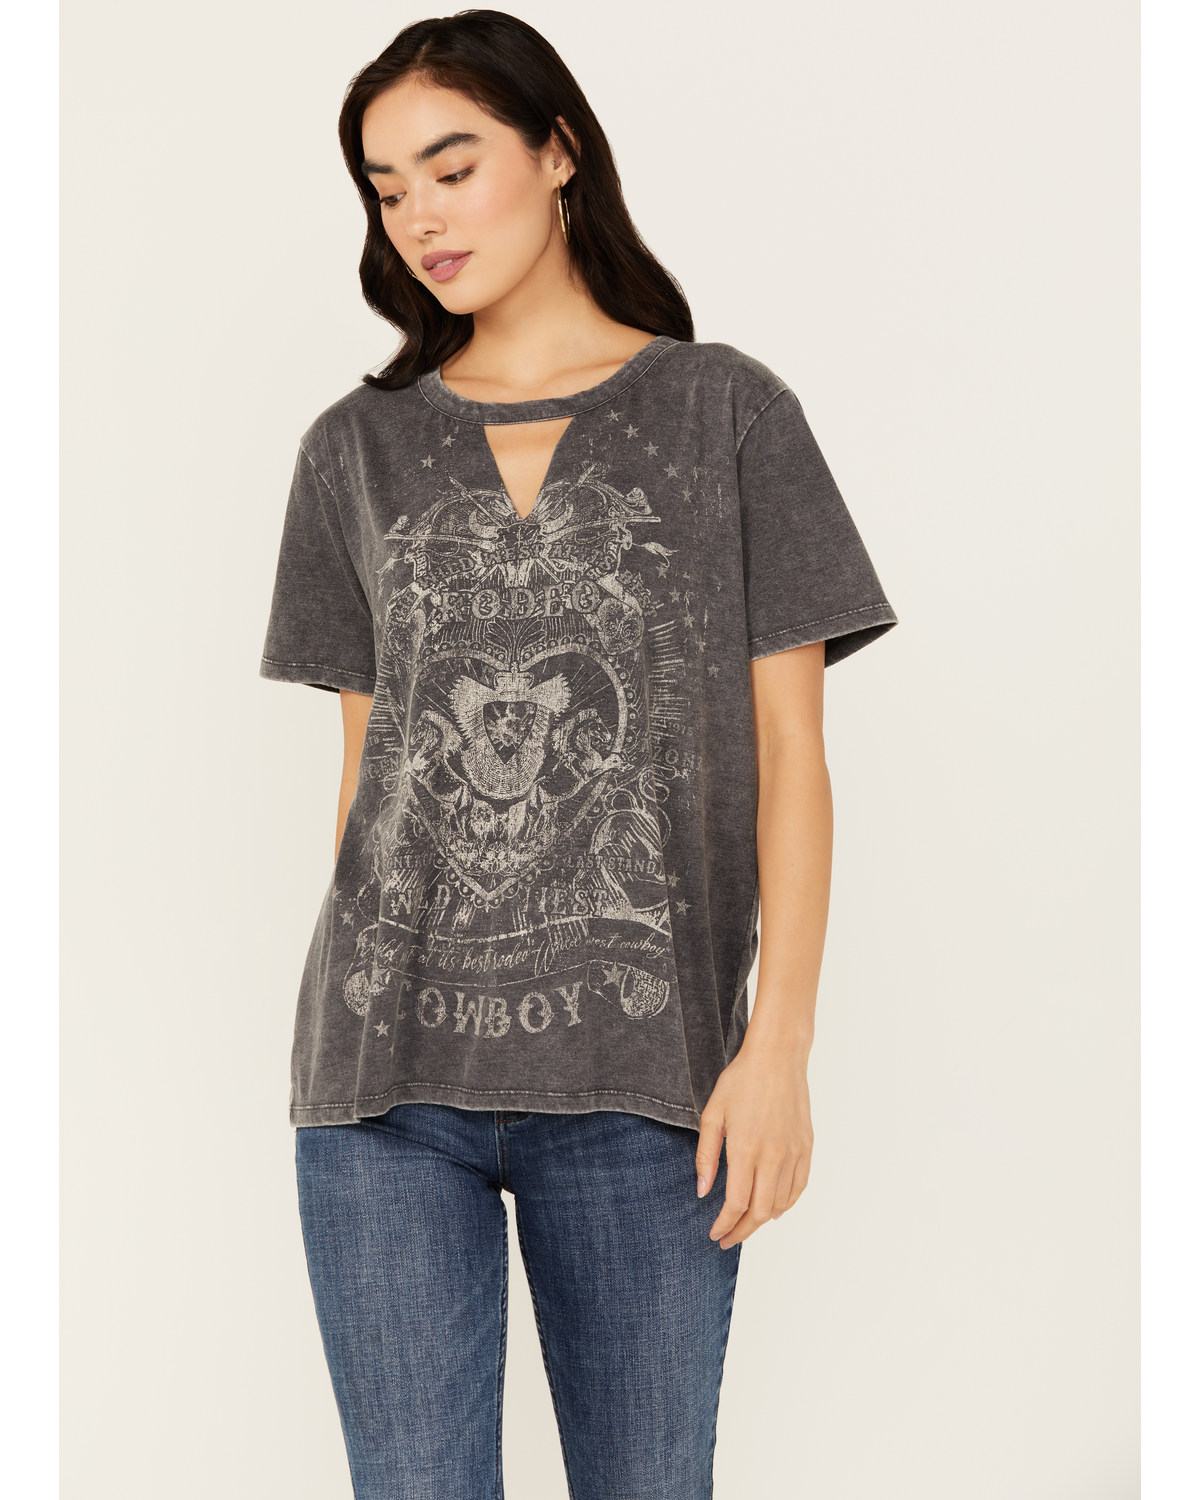 Blended Women's Rodeo Cowboy Cutout Short Sleeve Graphic Tee